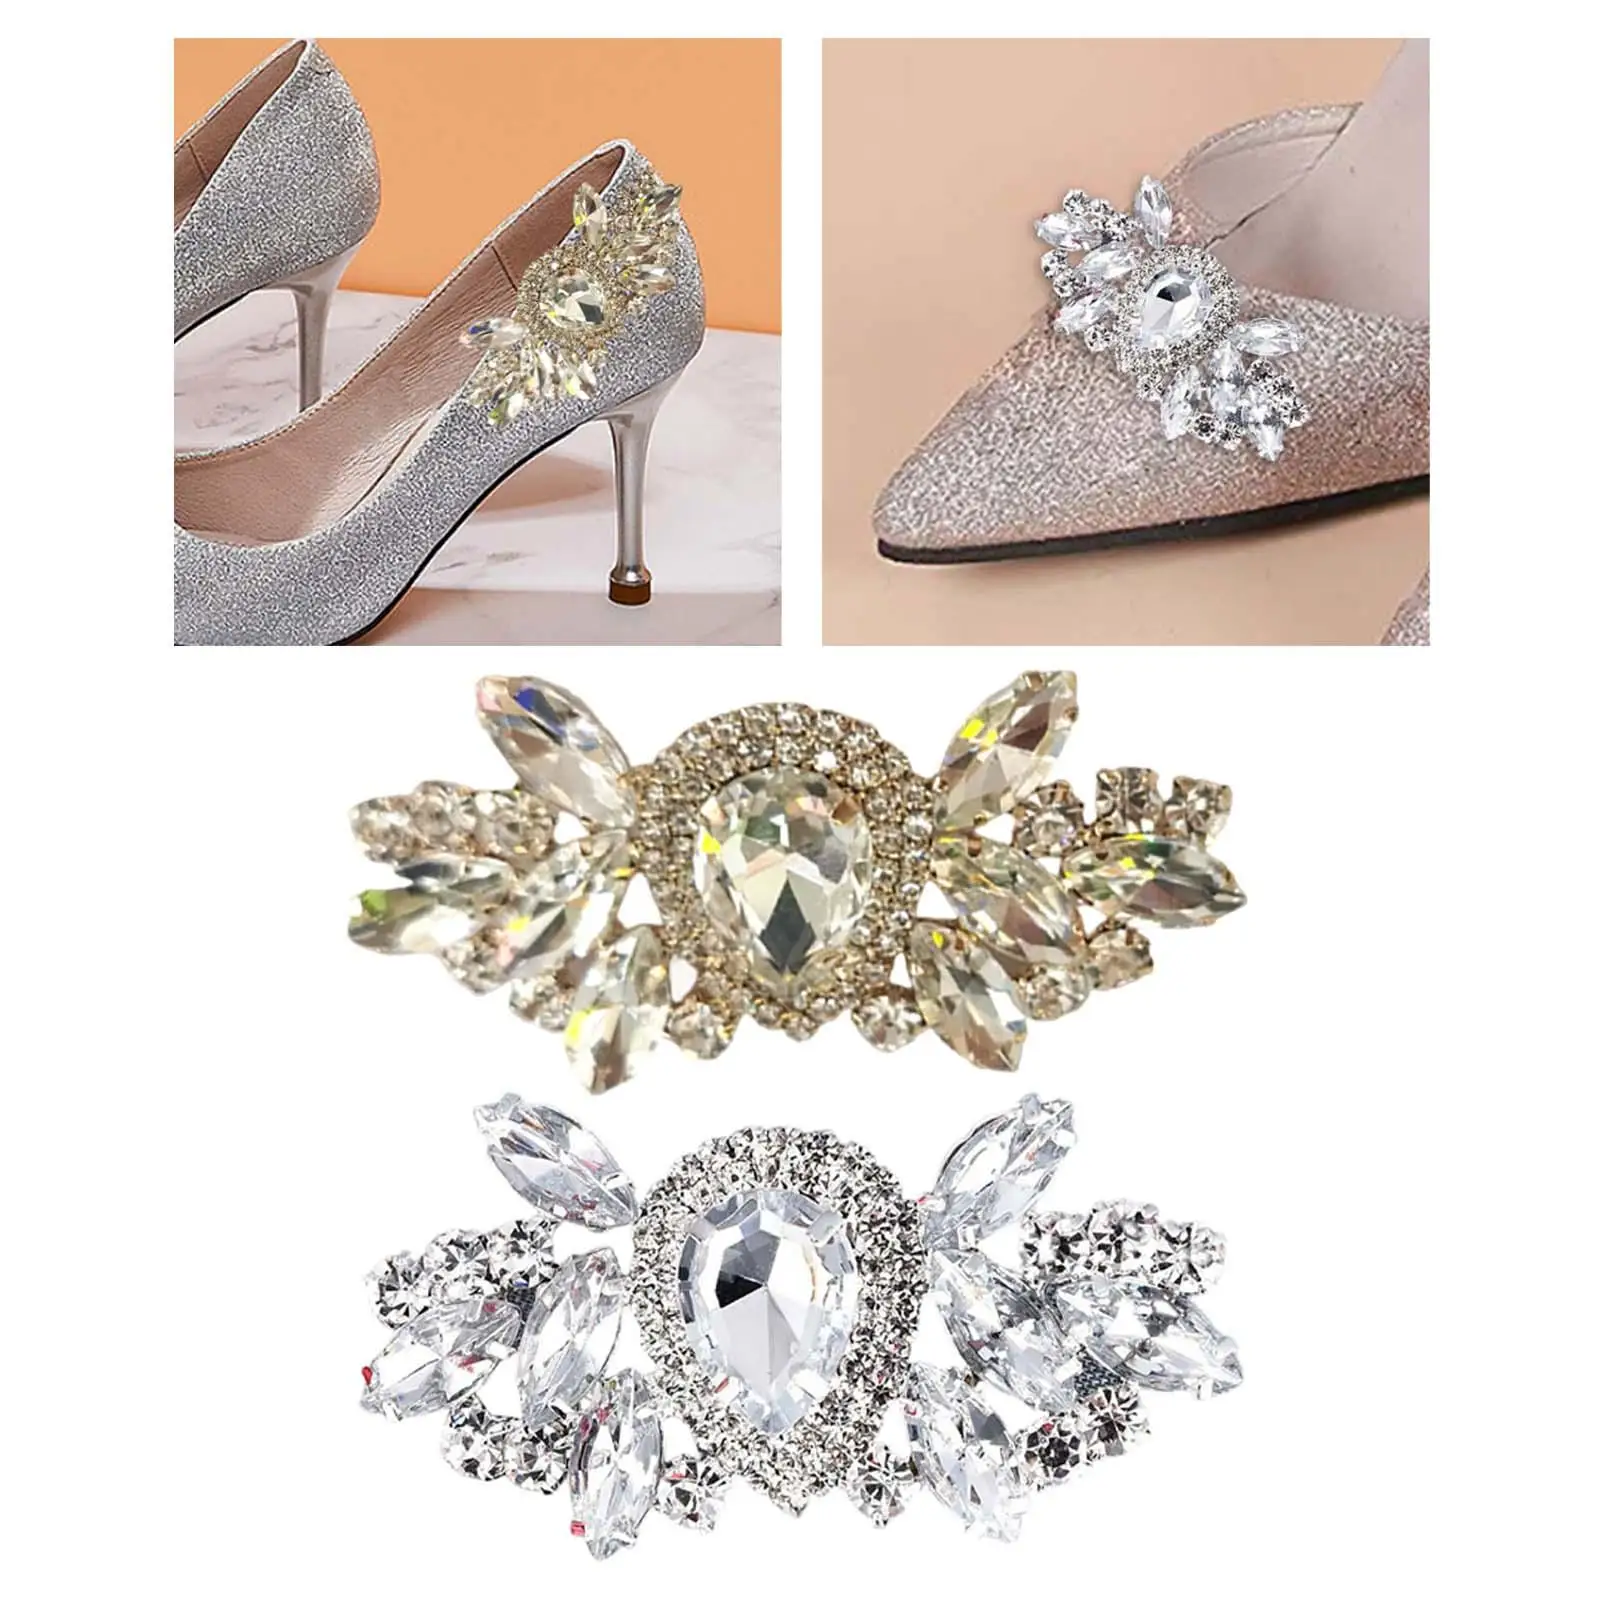 Fashion Shoes Charm Crafting Decoration Jewelry Making DIY Banquet Clamps Embellishments Shoes Buckle for Wedding Bridesmaids